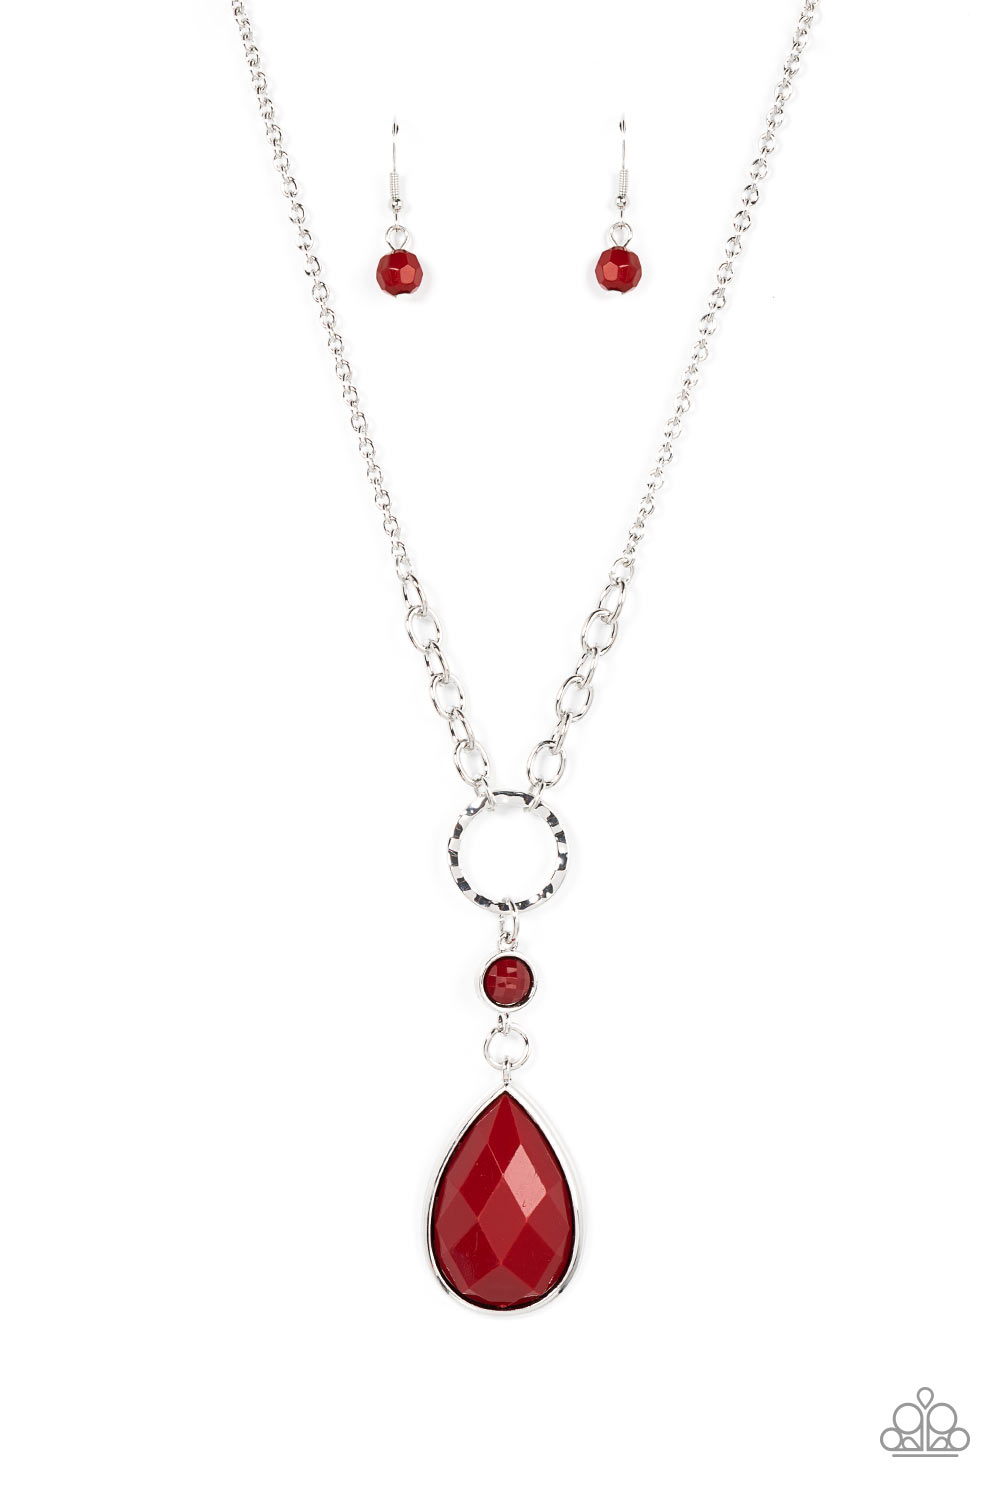 Valley Girl Glamour Red Necklace - Paparazzi Accessories  Encased in a sleek silver fitting, an oversized faceted wine teardrop bead swings from the bottom of a round wine bead and hammered silver hoop, culminating into a bold pop of color below the collar. Features an adjustable clasp closure.  Sold as one individual necklace. Includes one pair of matching earrings.